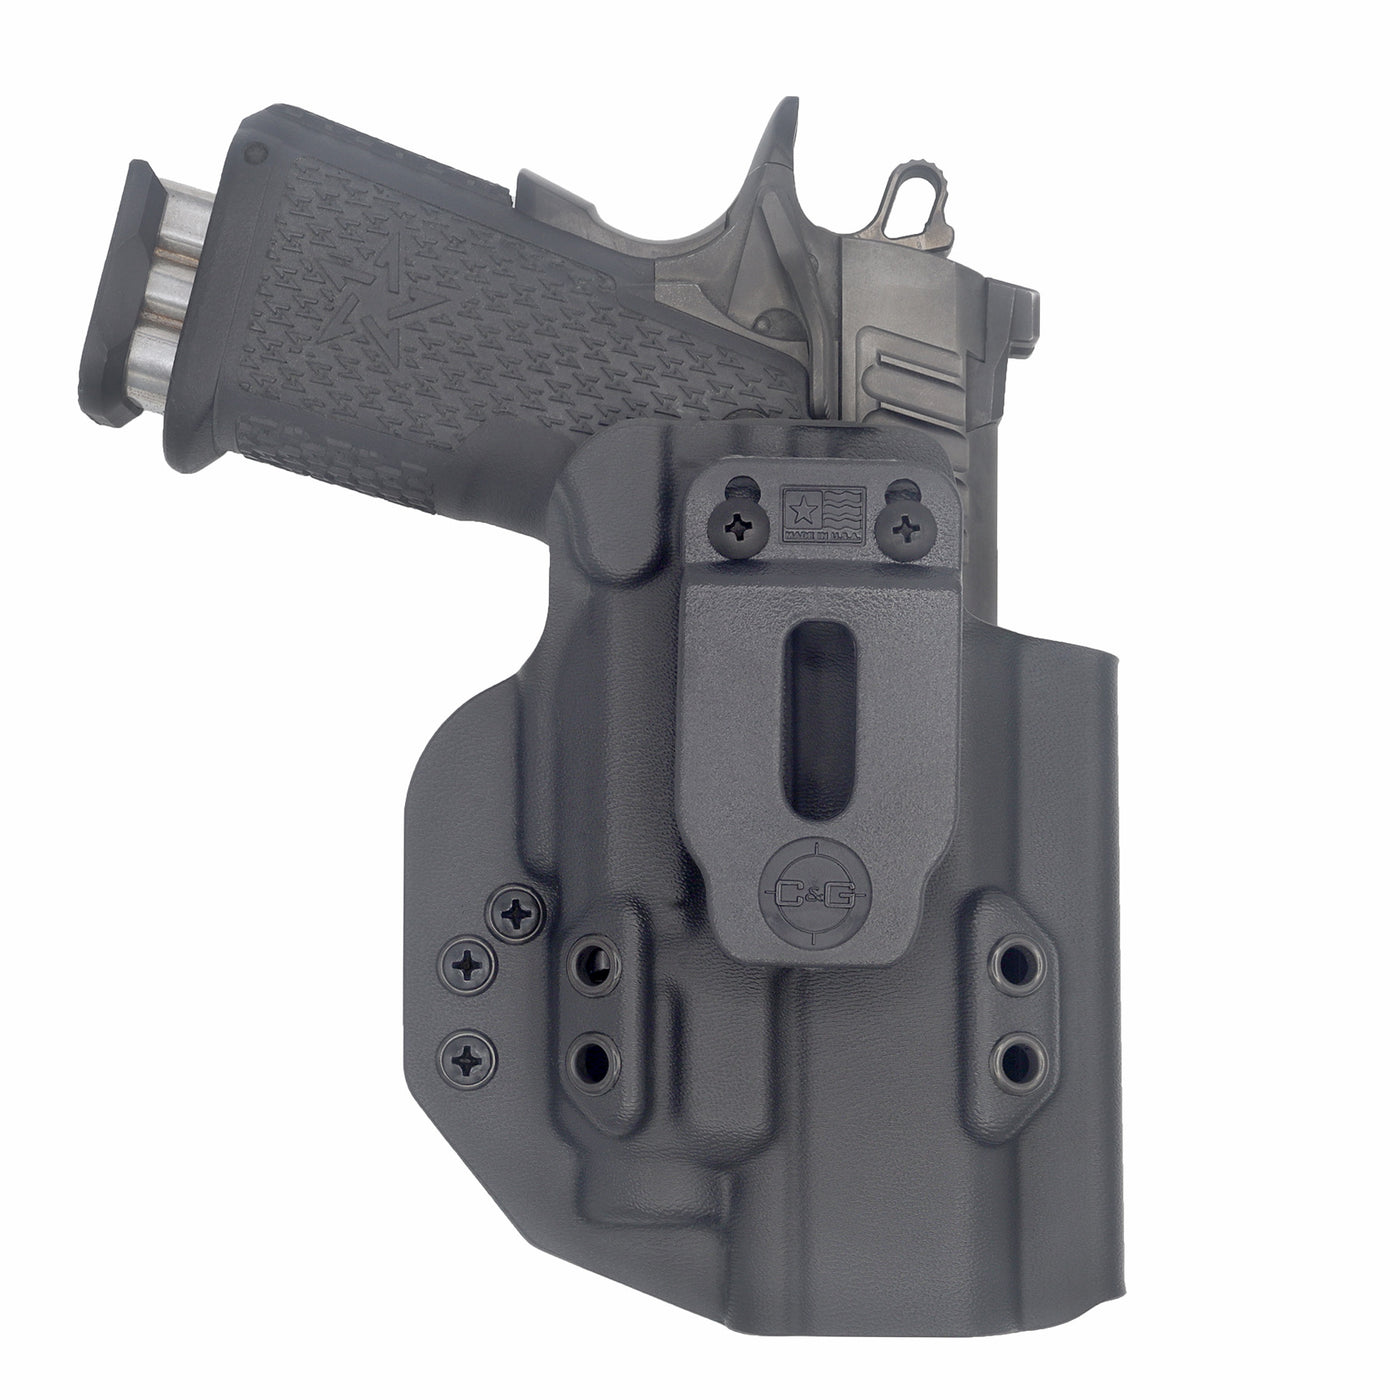 C&G Holsters Quickship IWB Tactical 1911 Streamlight TLR7/a in holstered position